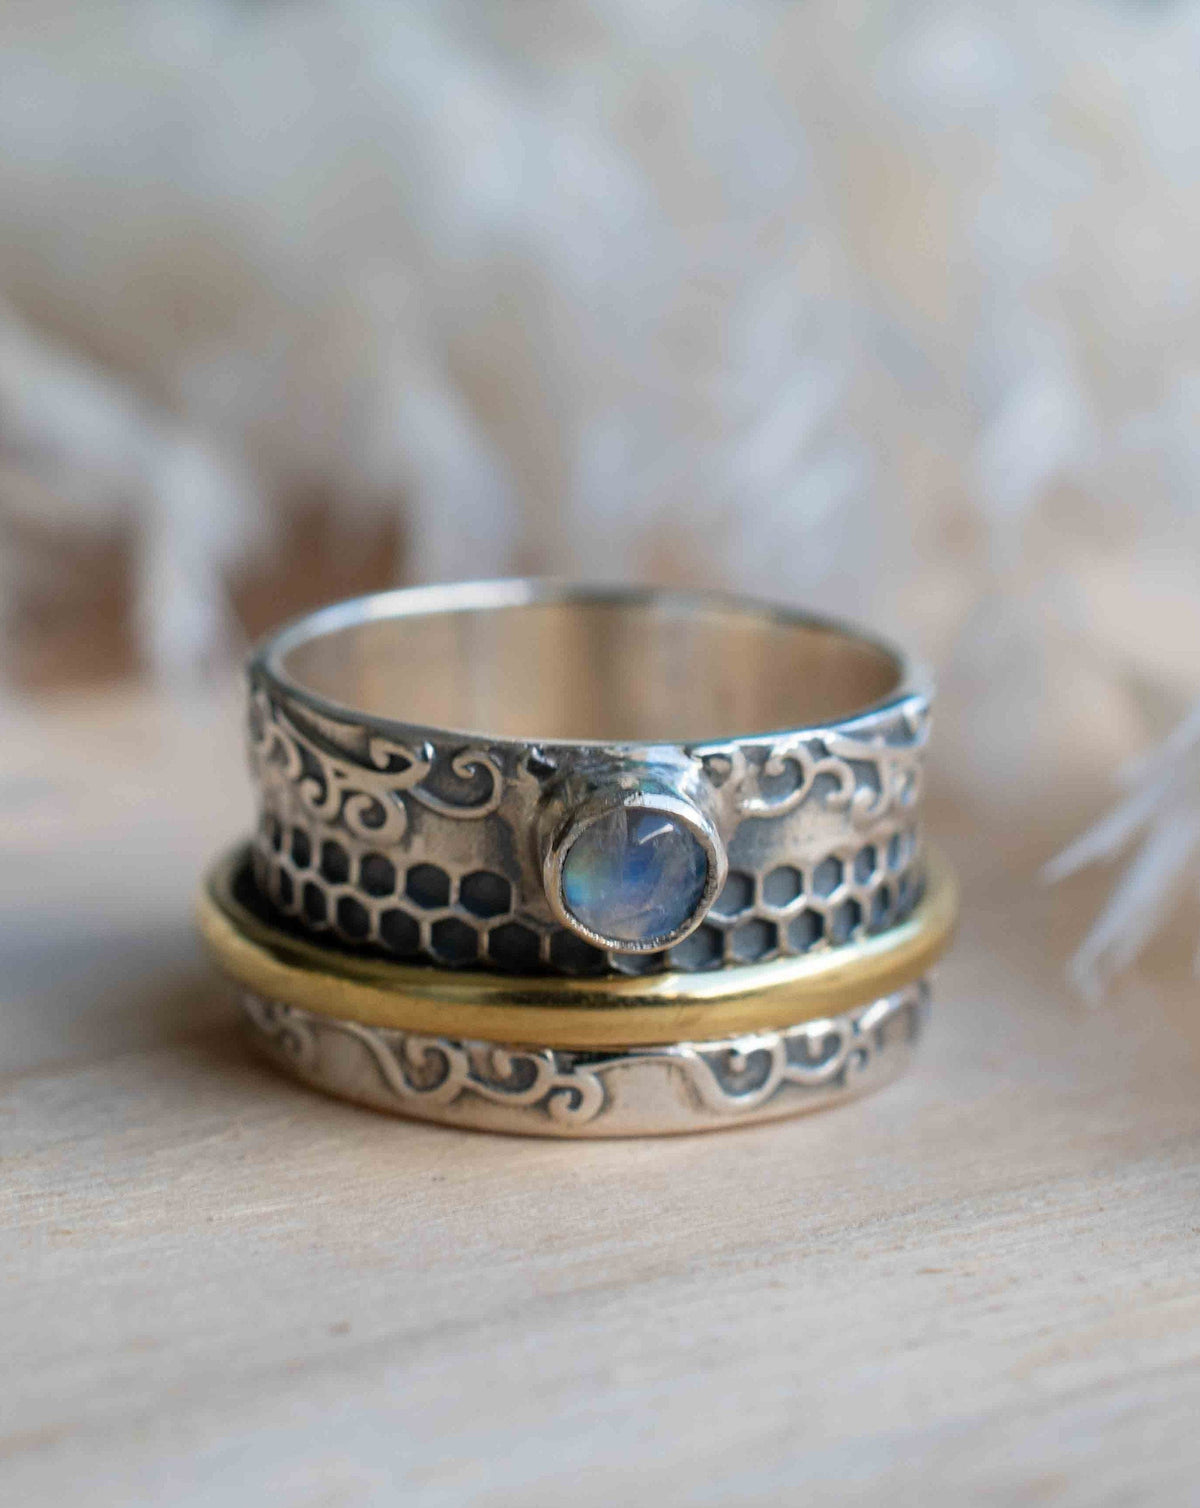 Moonstone Ring * Meditation * Spinner * Spinning * Anxiety * Hammered * Worry * Boho * Spin * Thick Band * Sterling Silver * Bronze BJS038